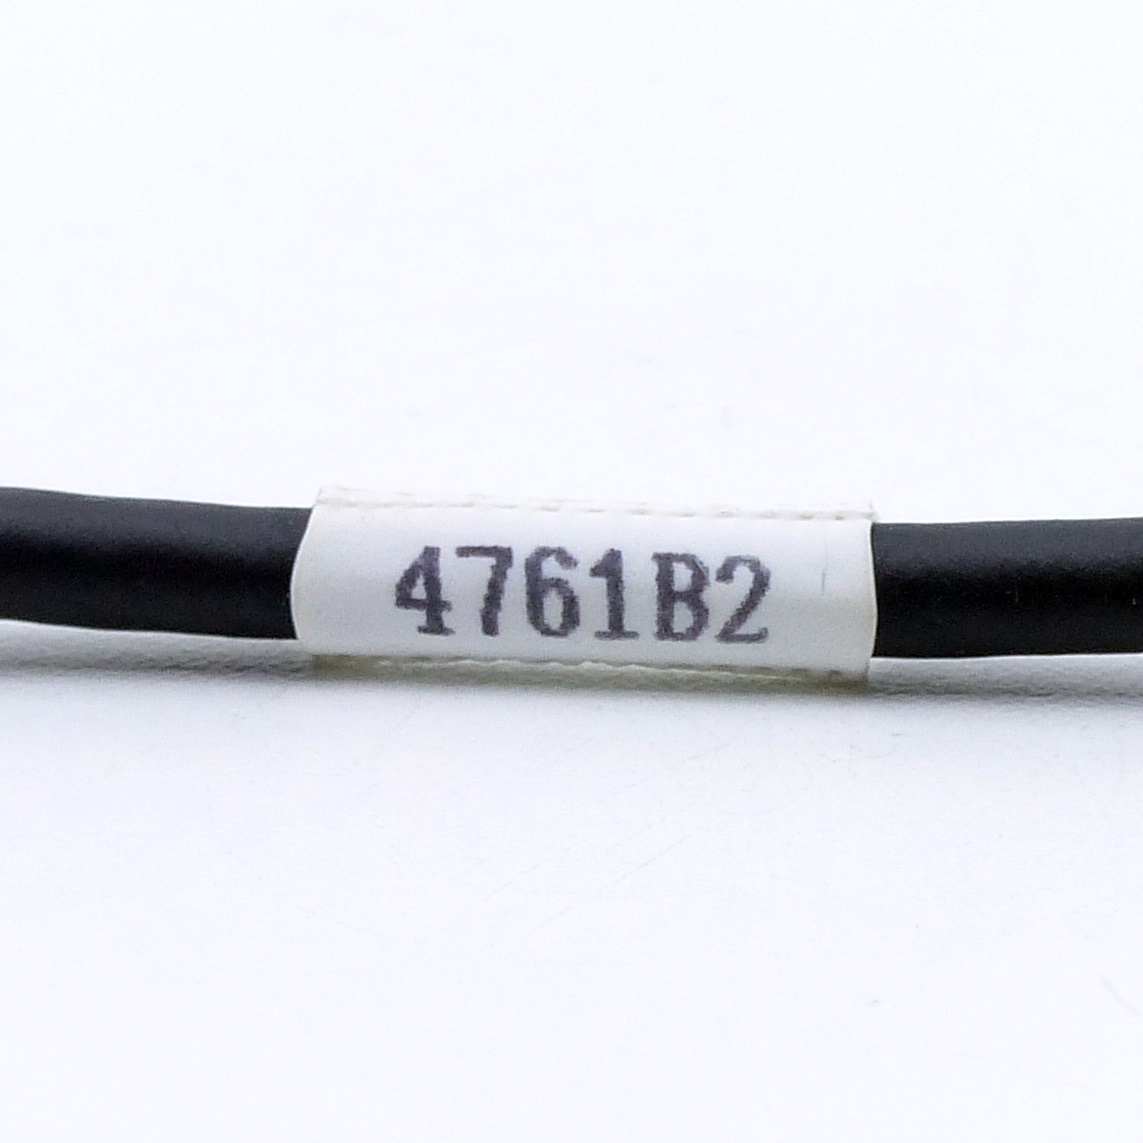 Cable 4761B2 